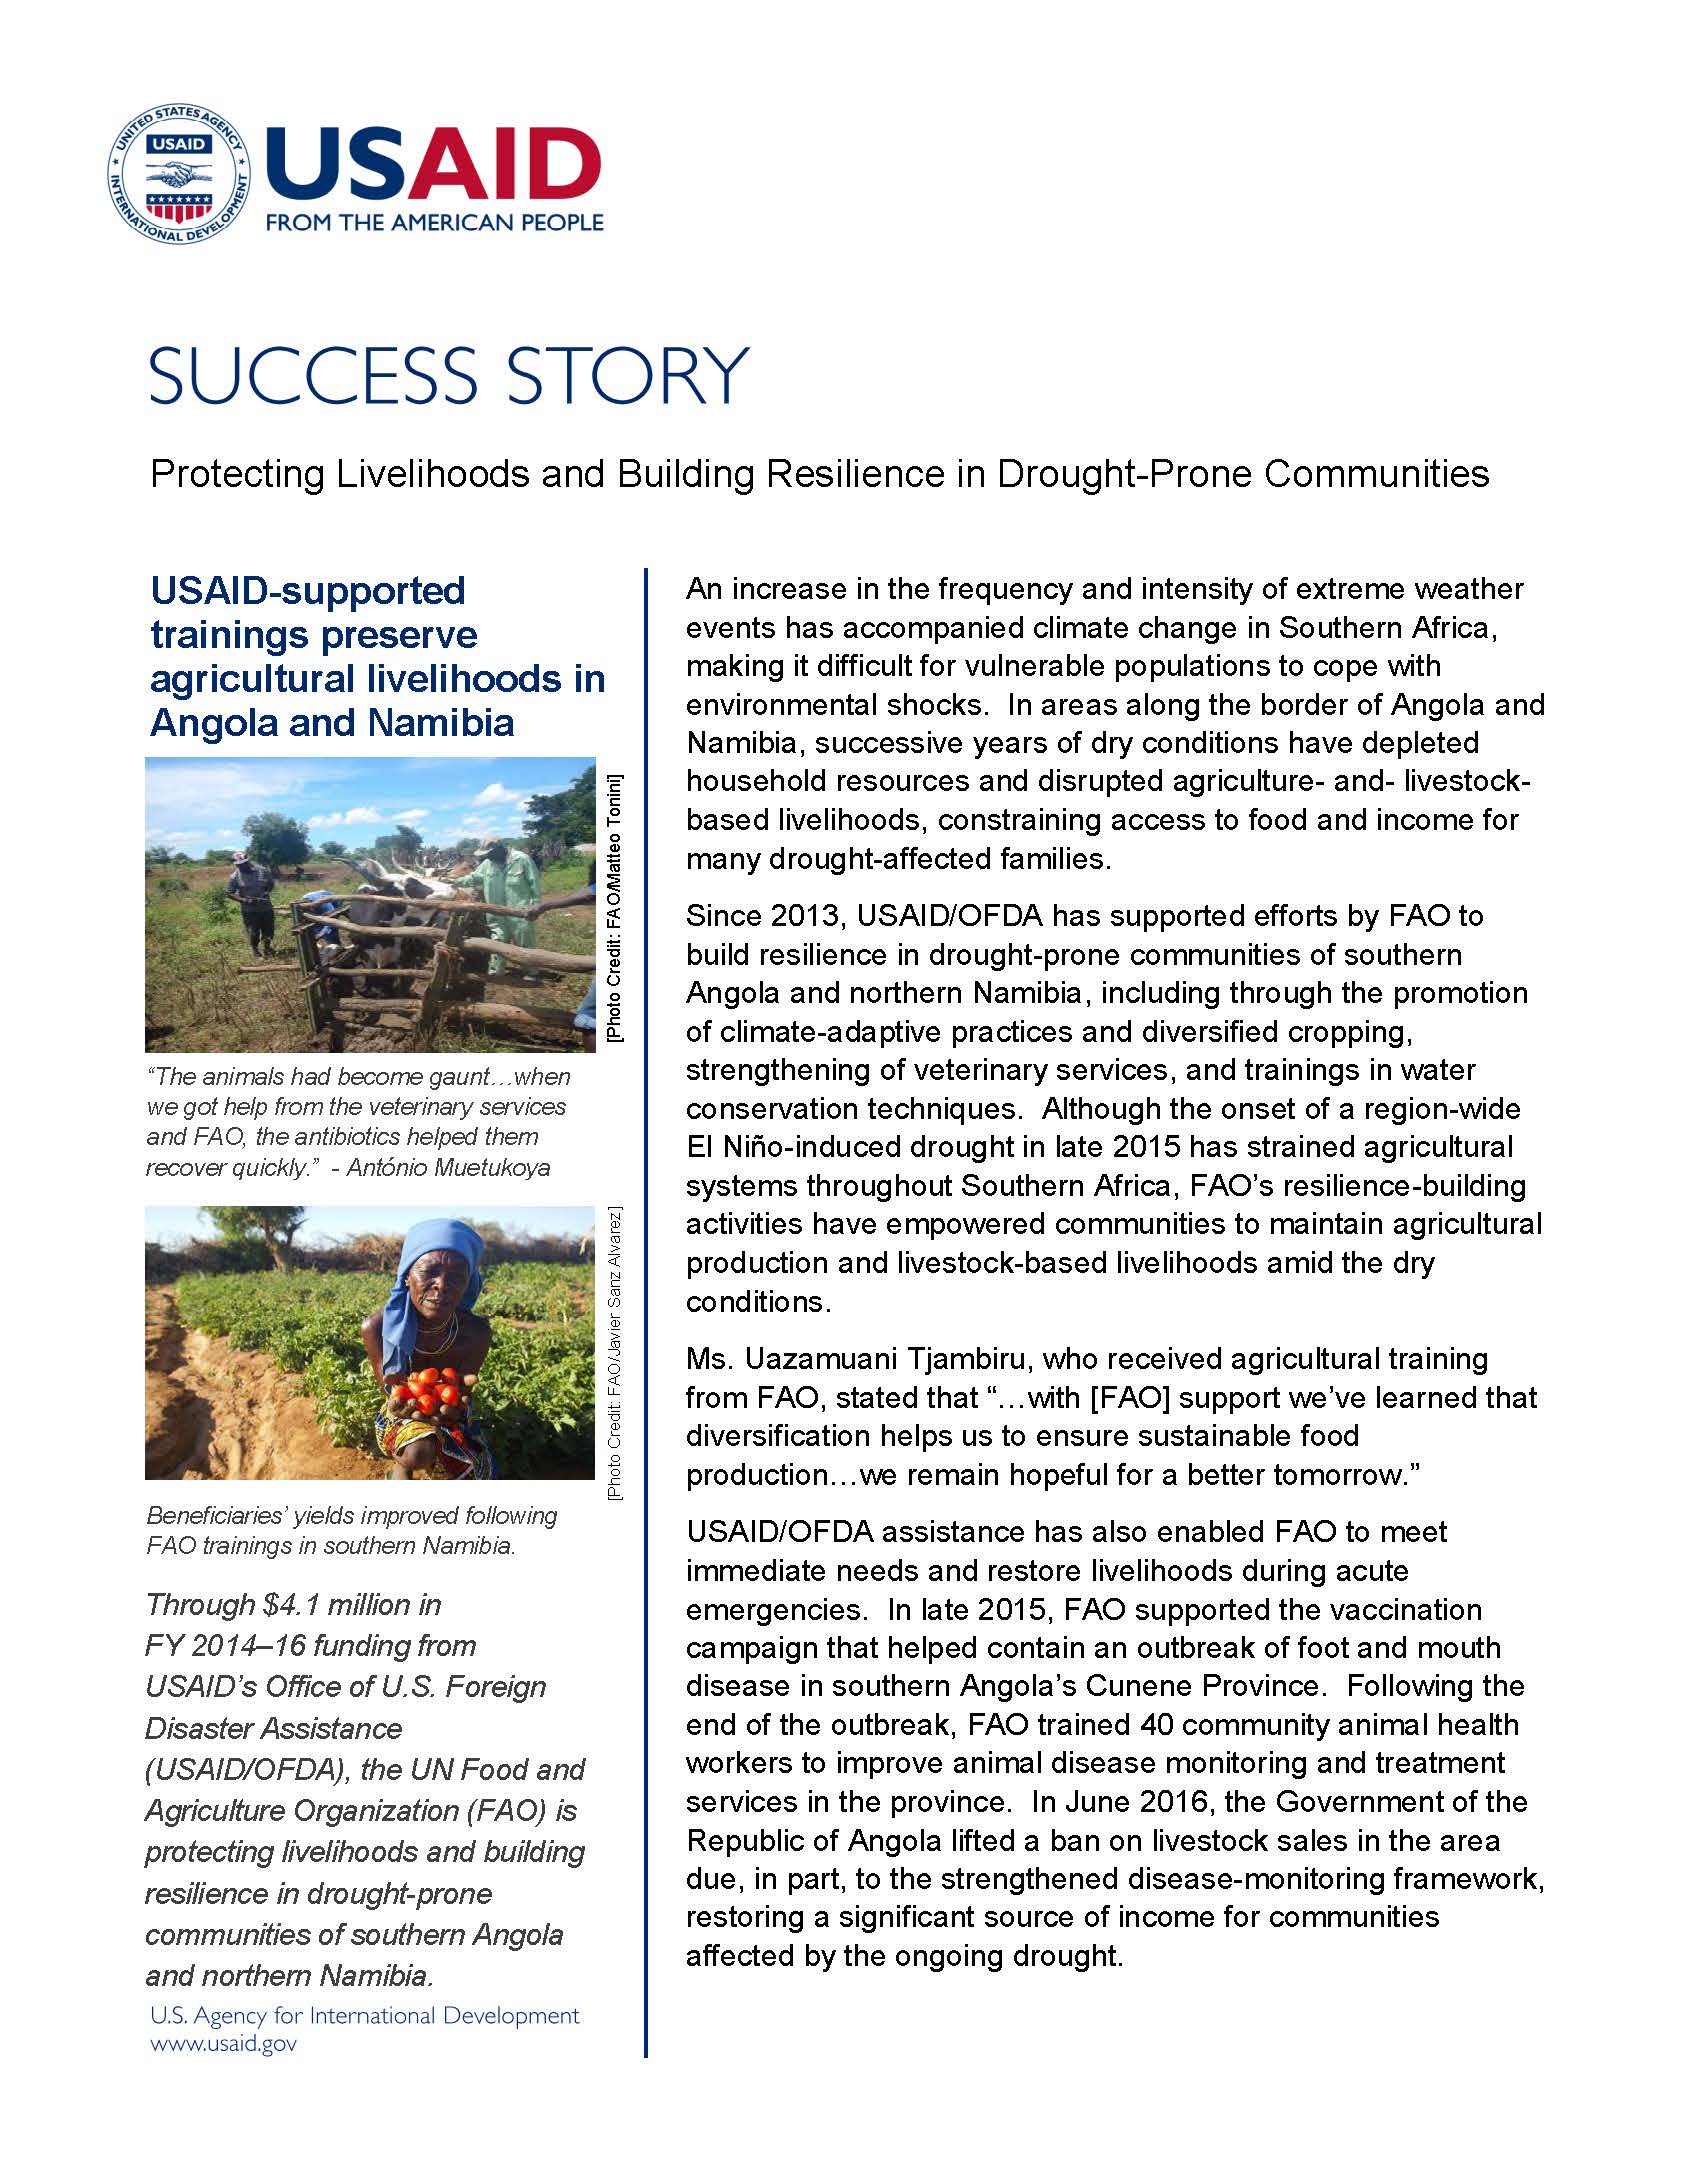 Protecting Livelihoods and Building Resilience in Drought-Prone Communities